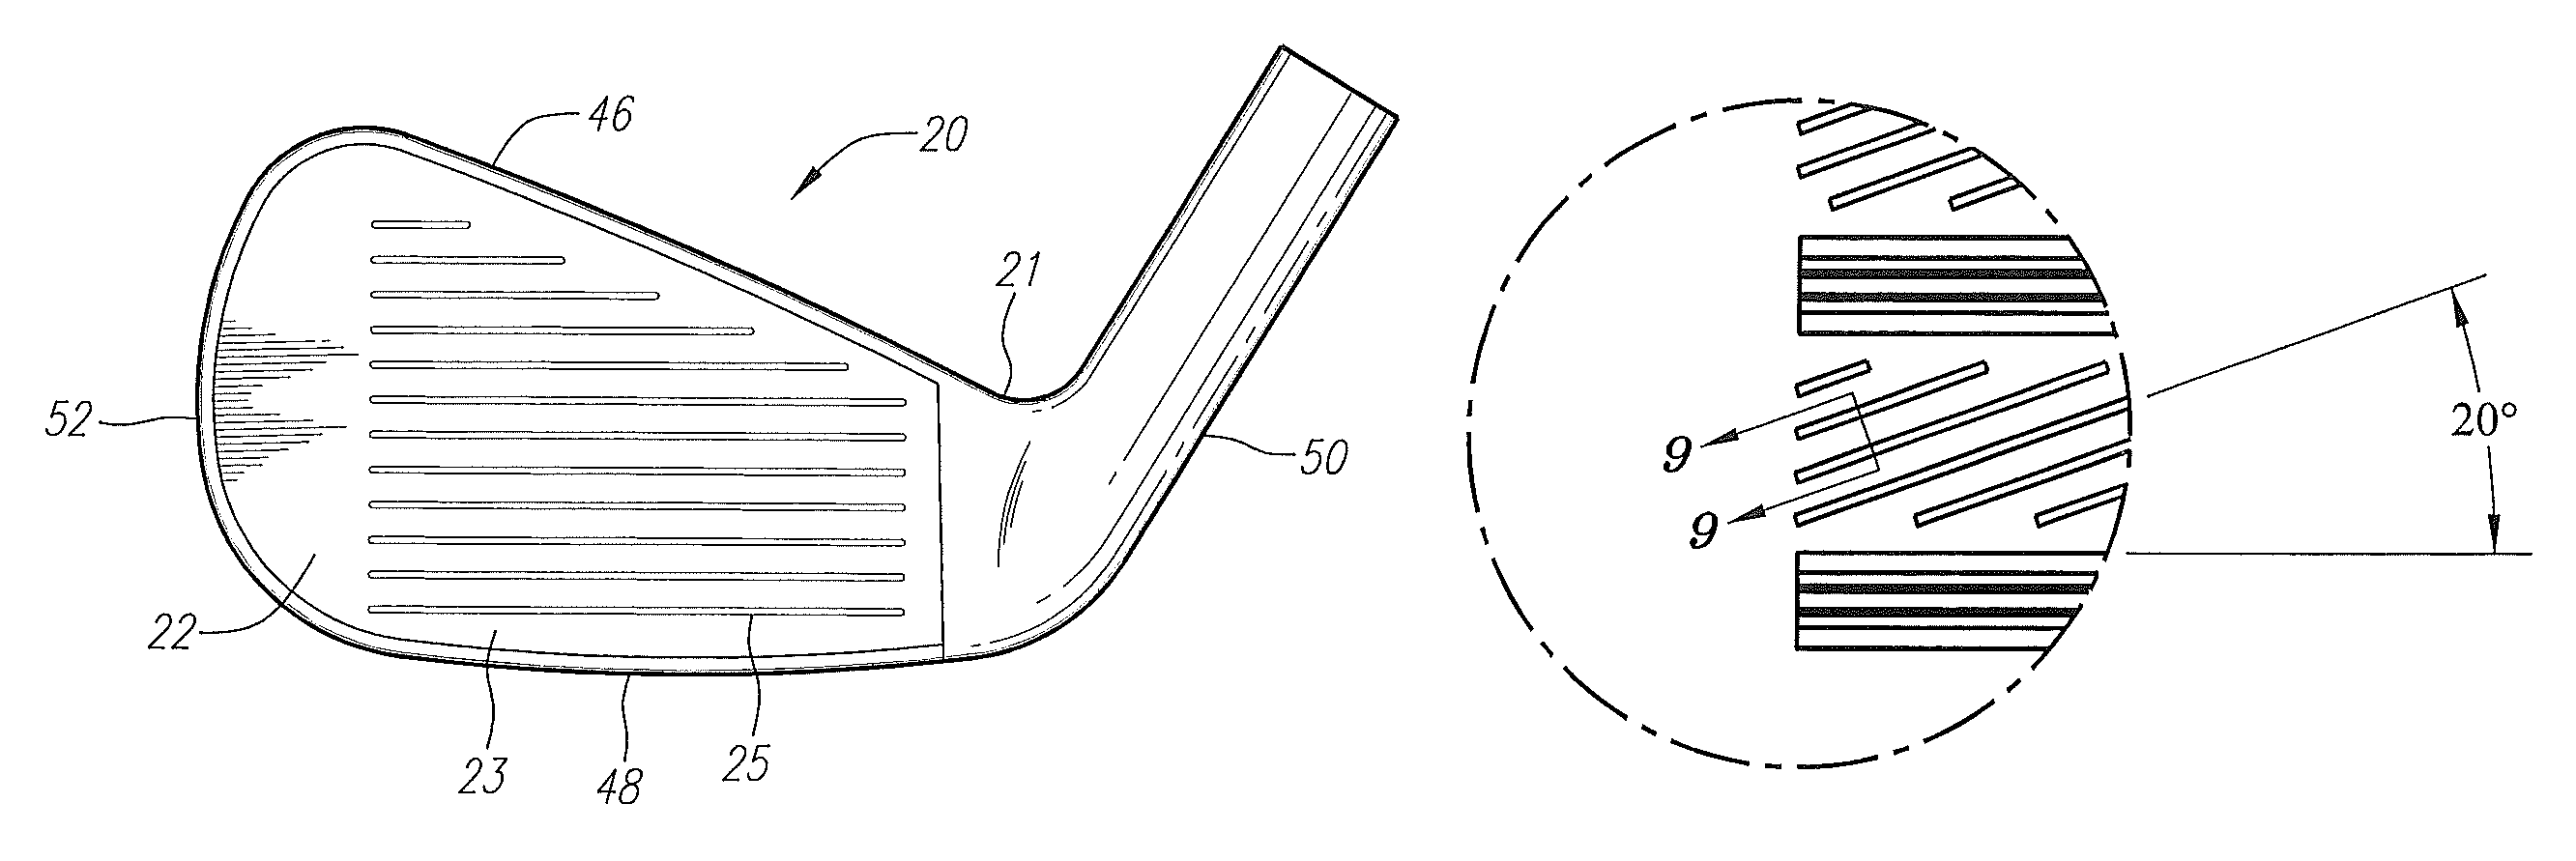 Golf club head with grooves